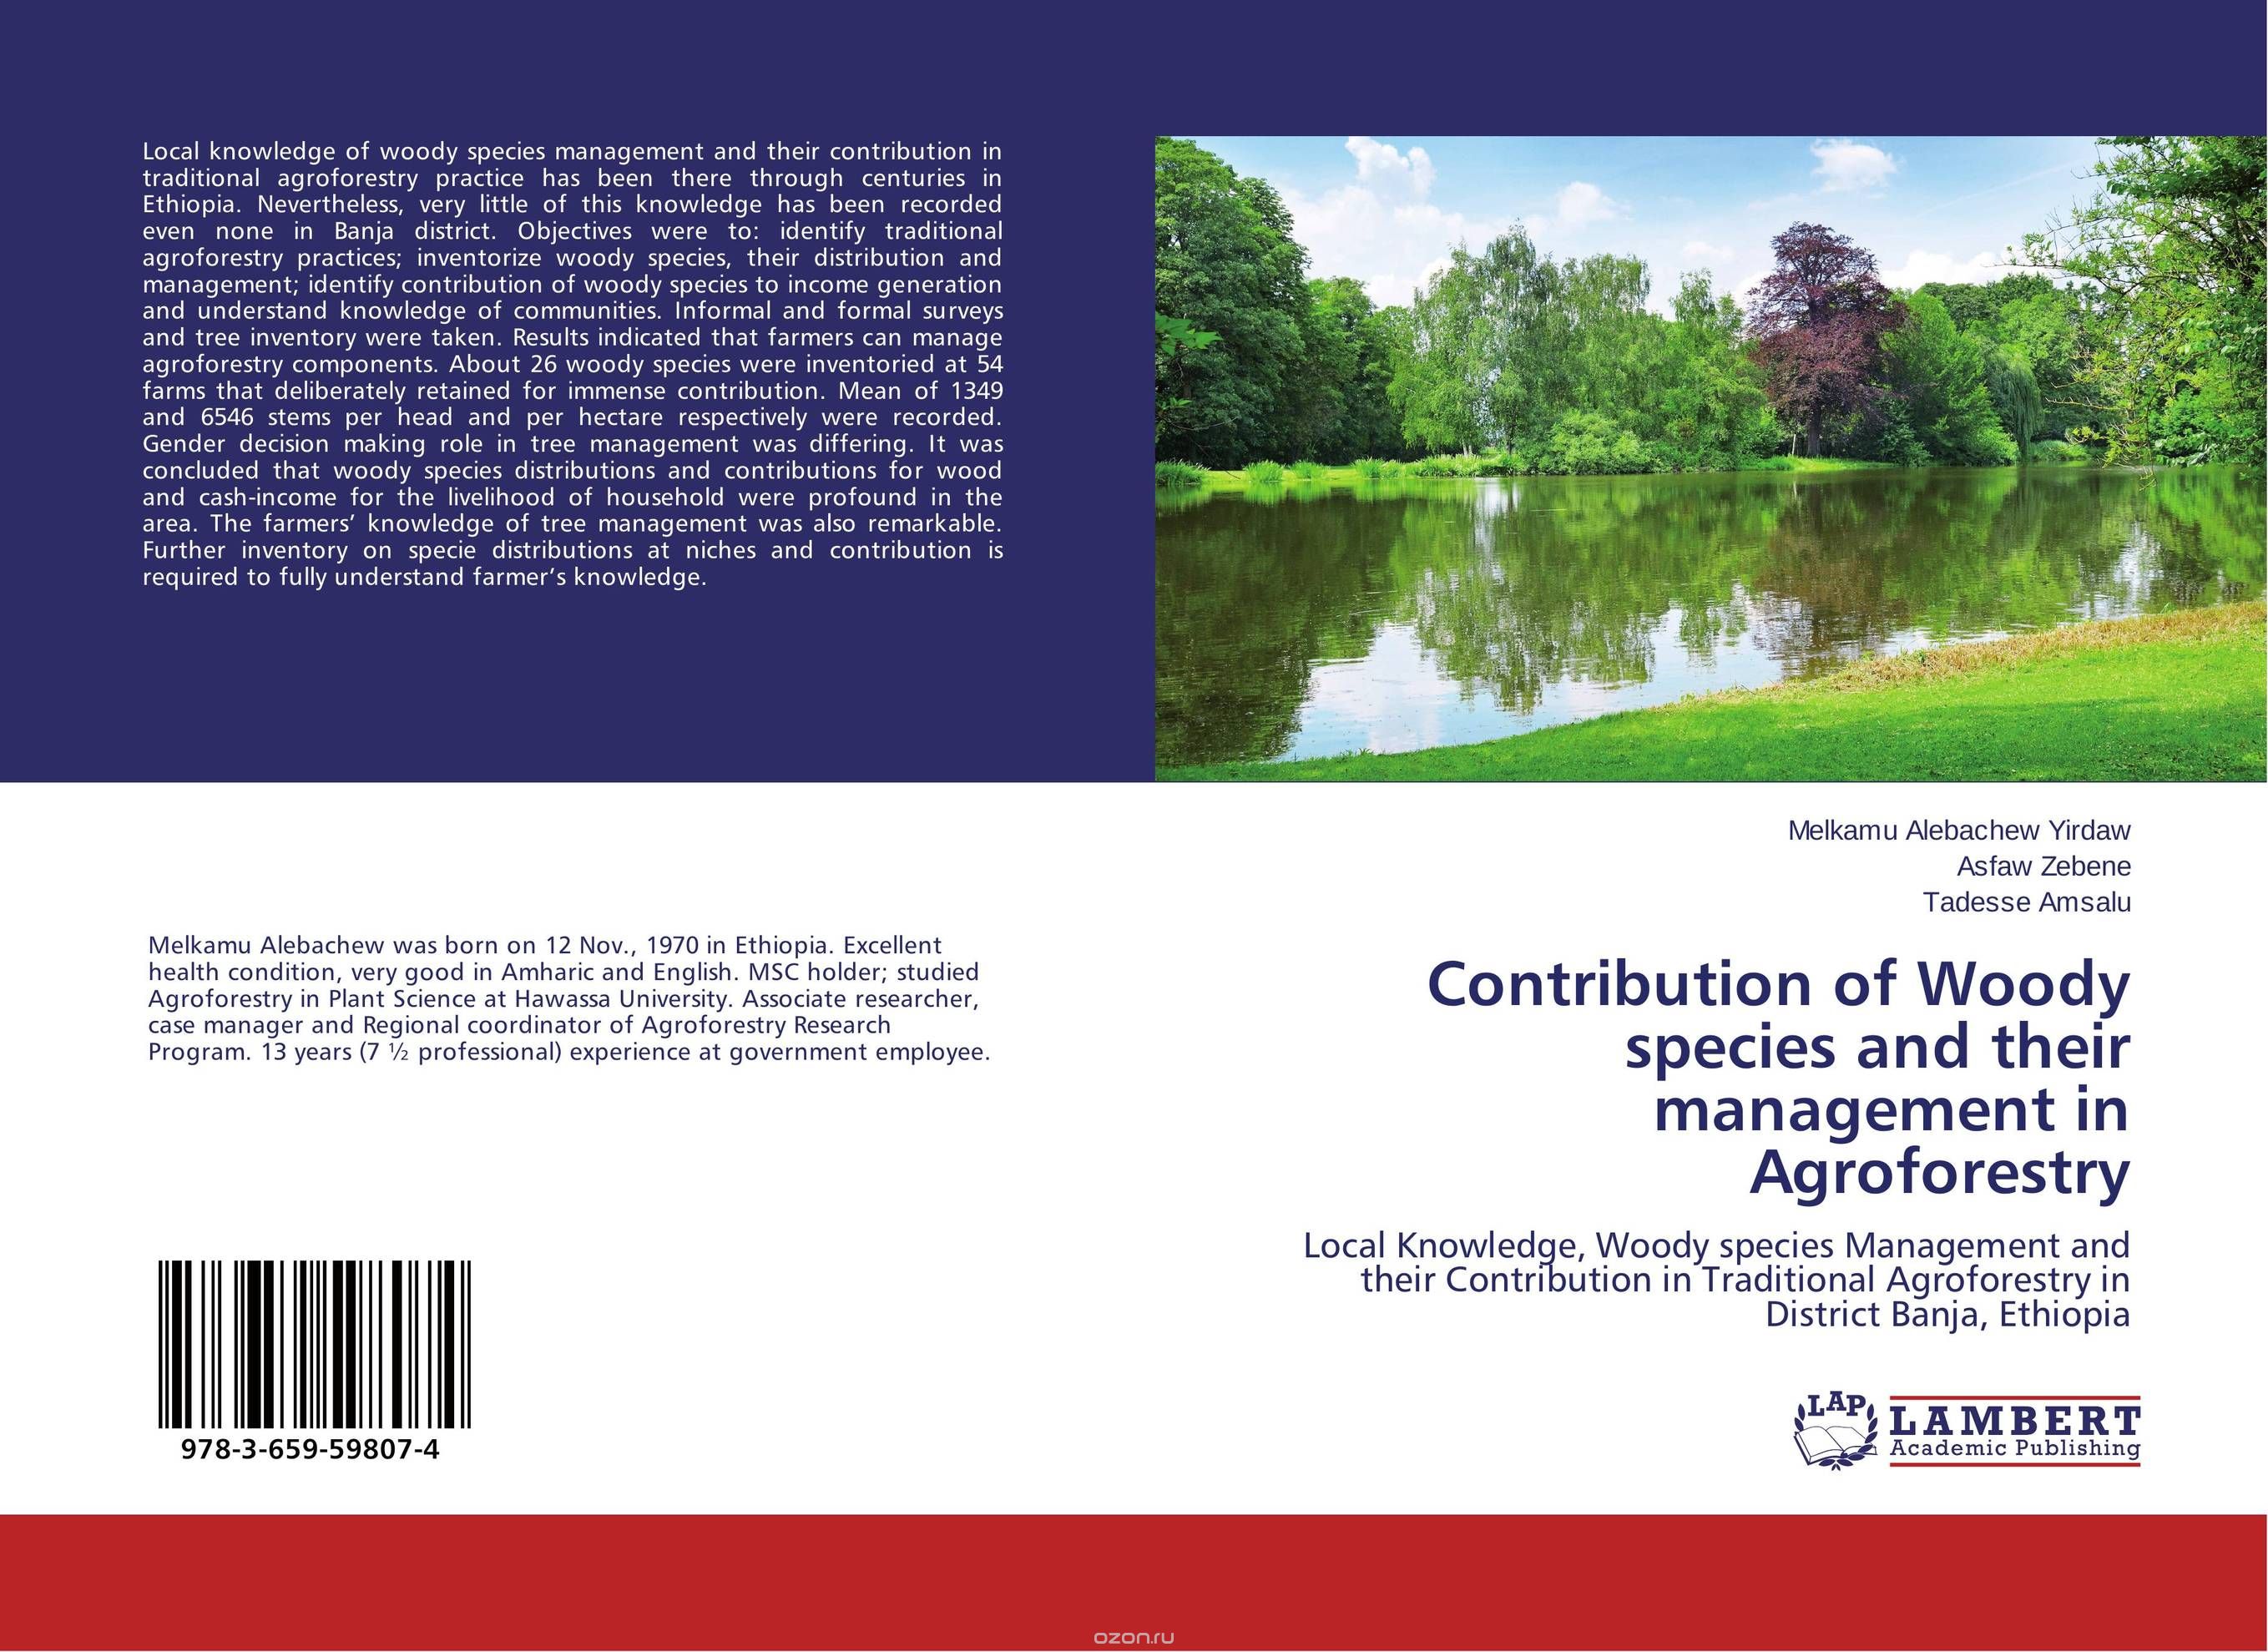 Скачать книгу "Contribution of Woody species and their management in Agroforestry"